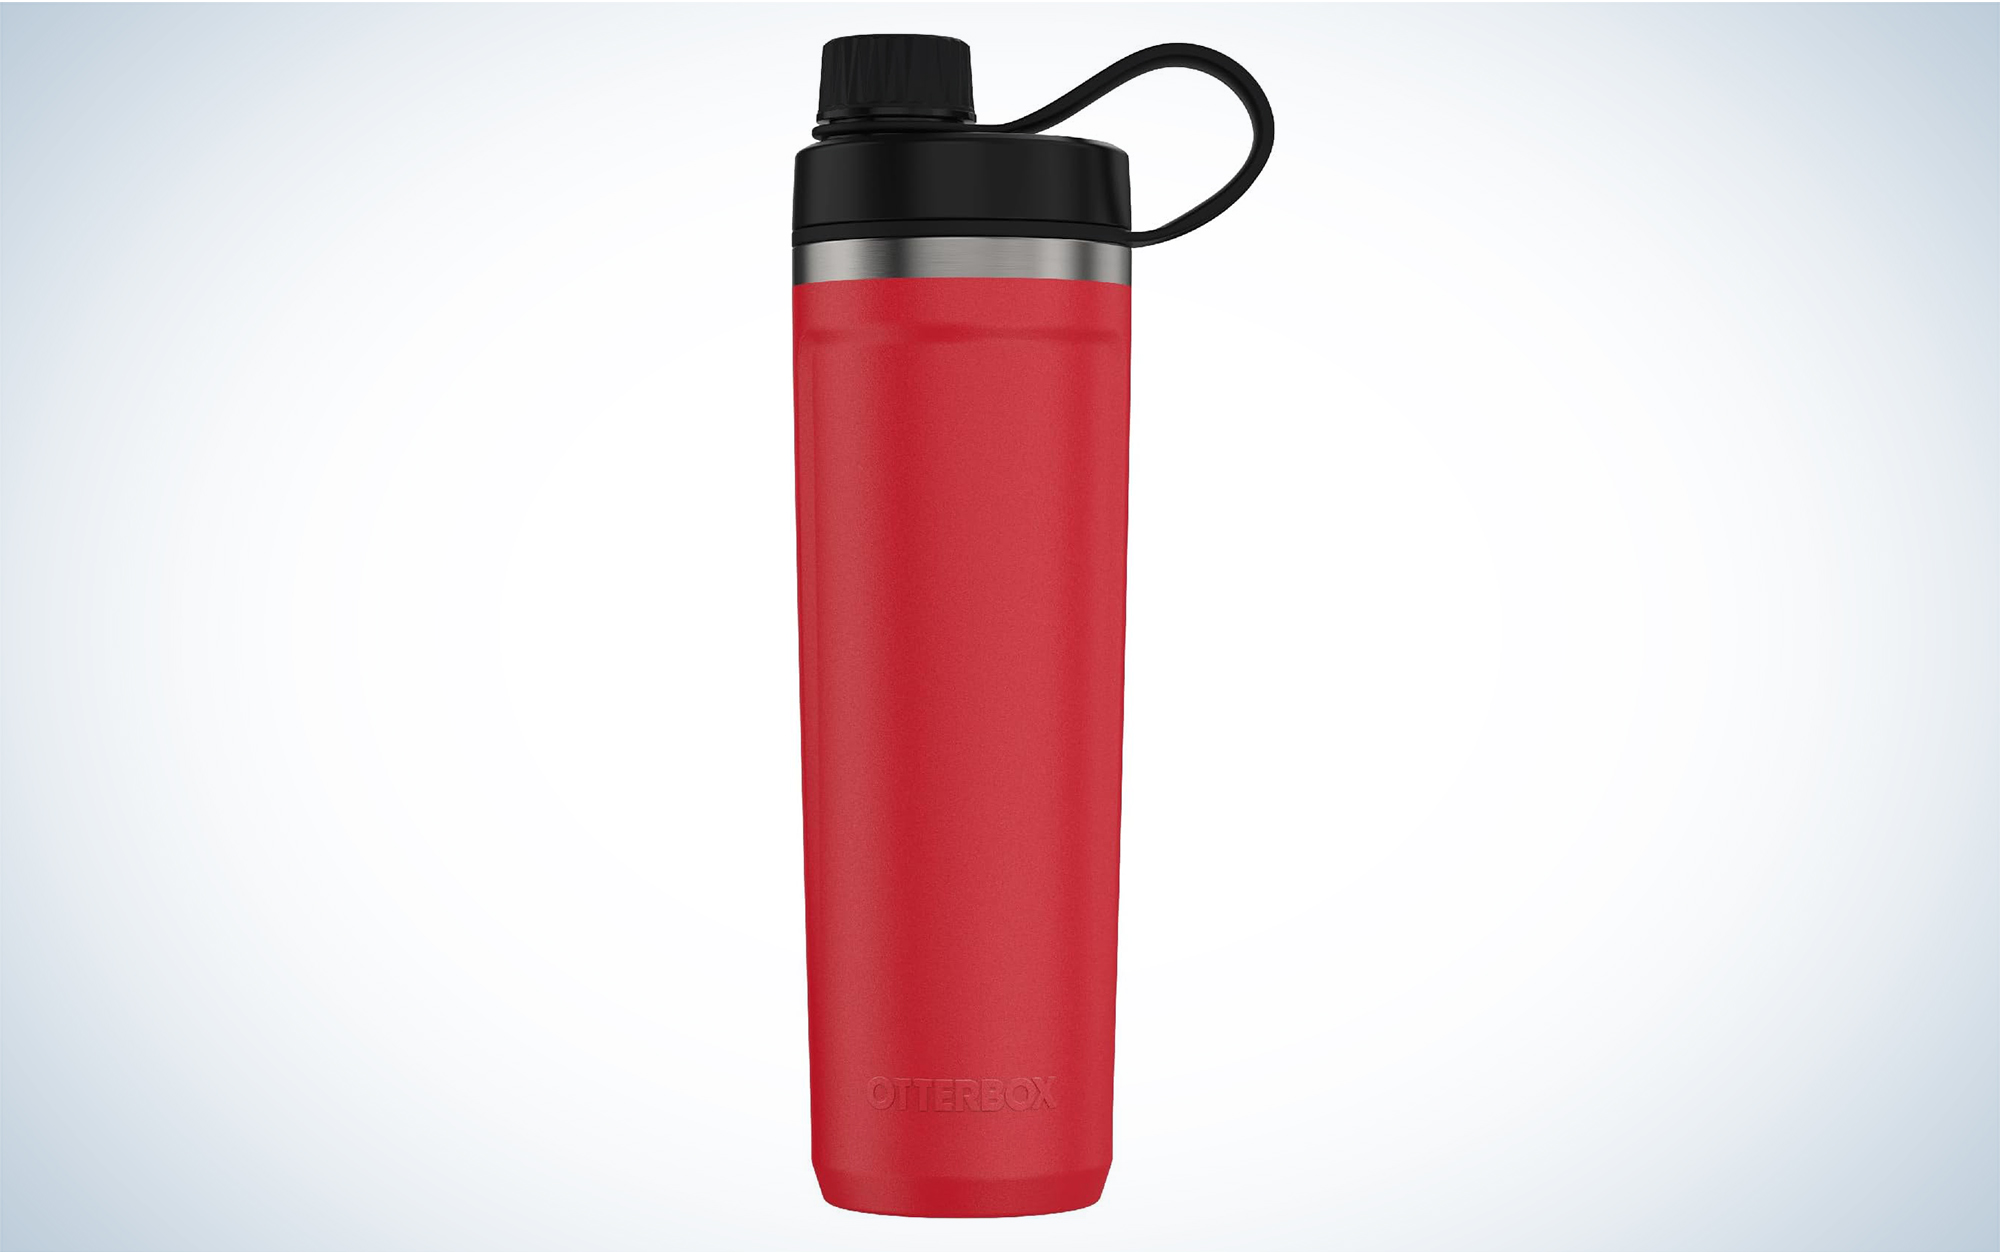 Watersy Stainless Steel Sport Water Bottles, Vacuum Insulated